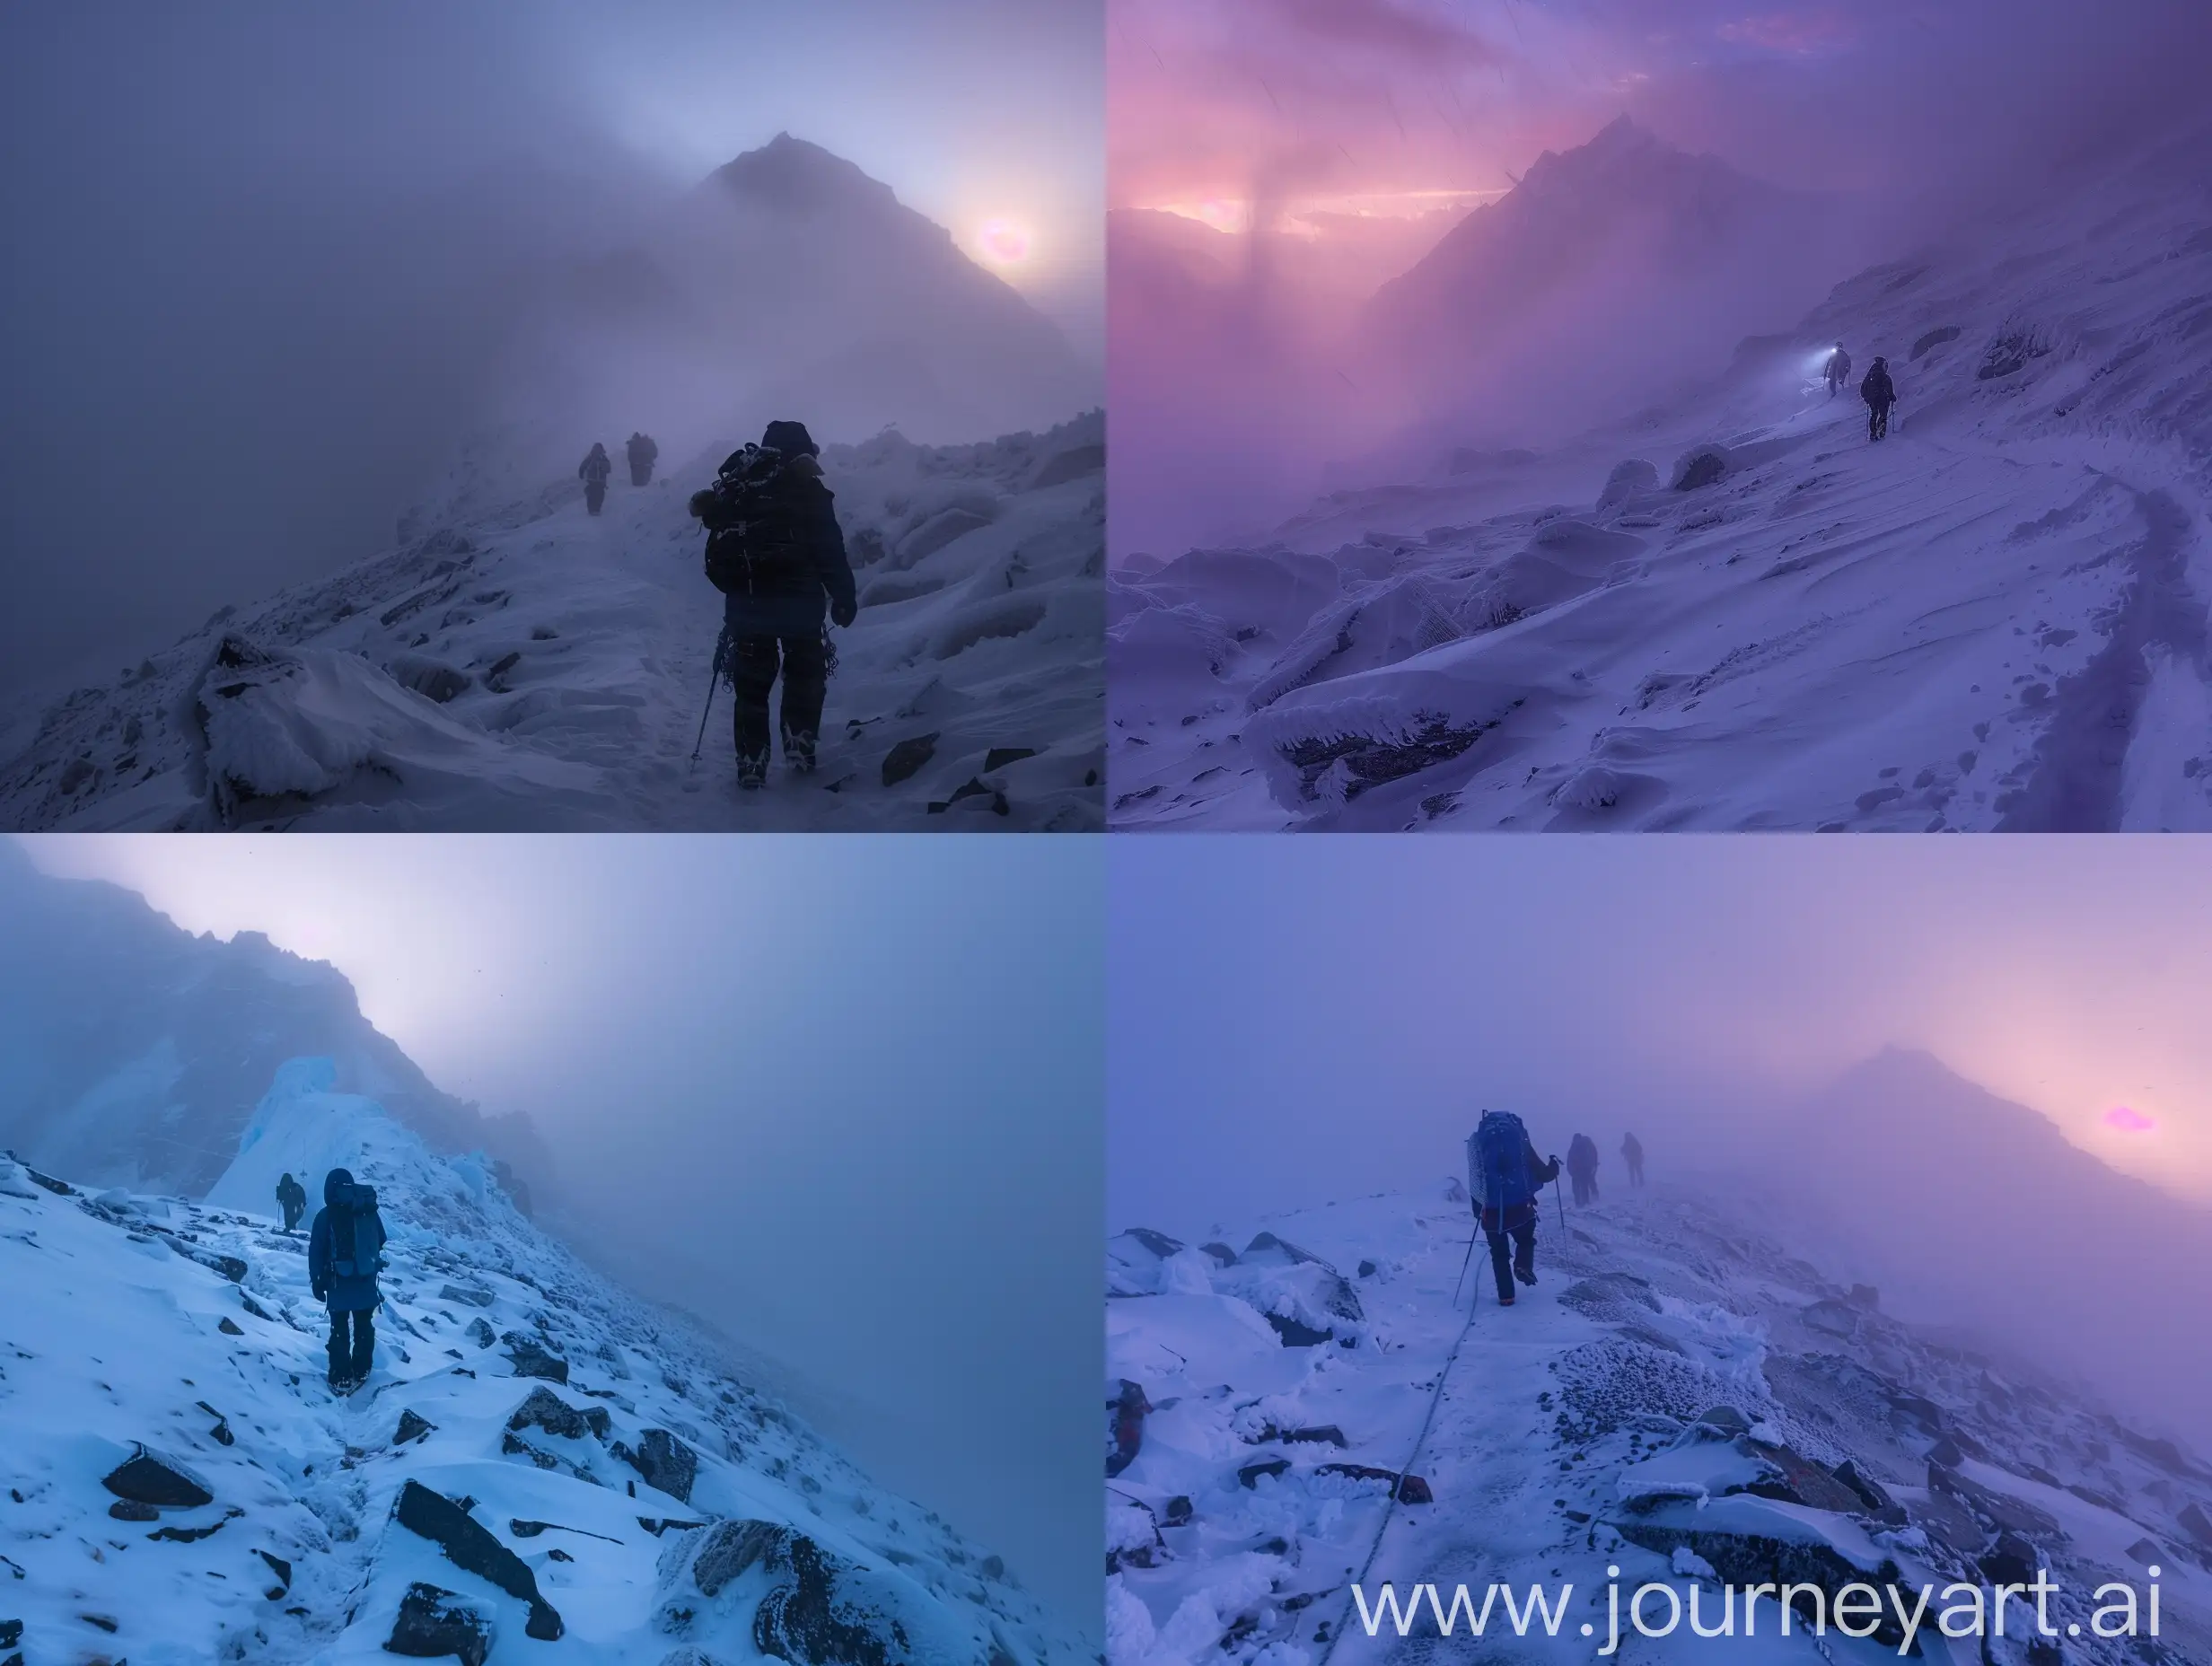 **twilight, snowstorm, visibility at 1m, tourist on the mountain trail to mount Everest, 2500 meters above sea level